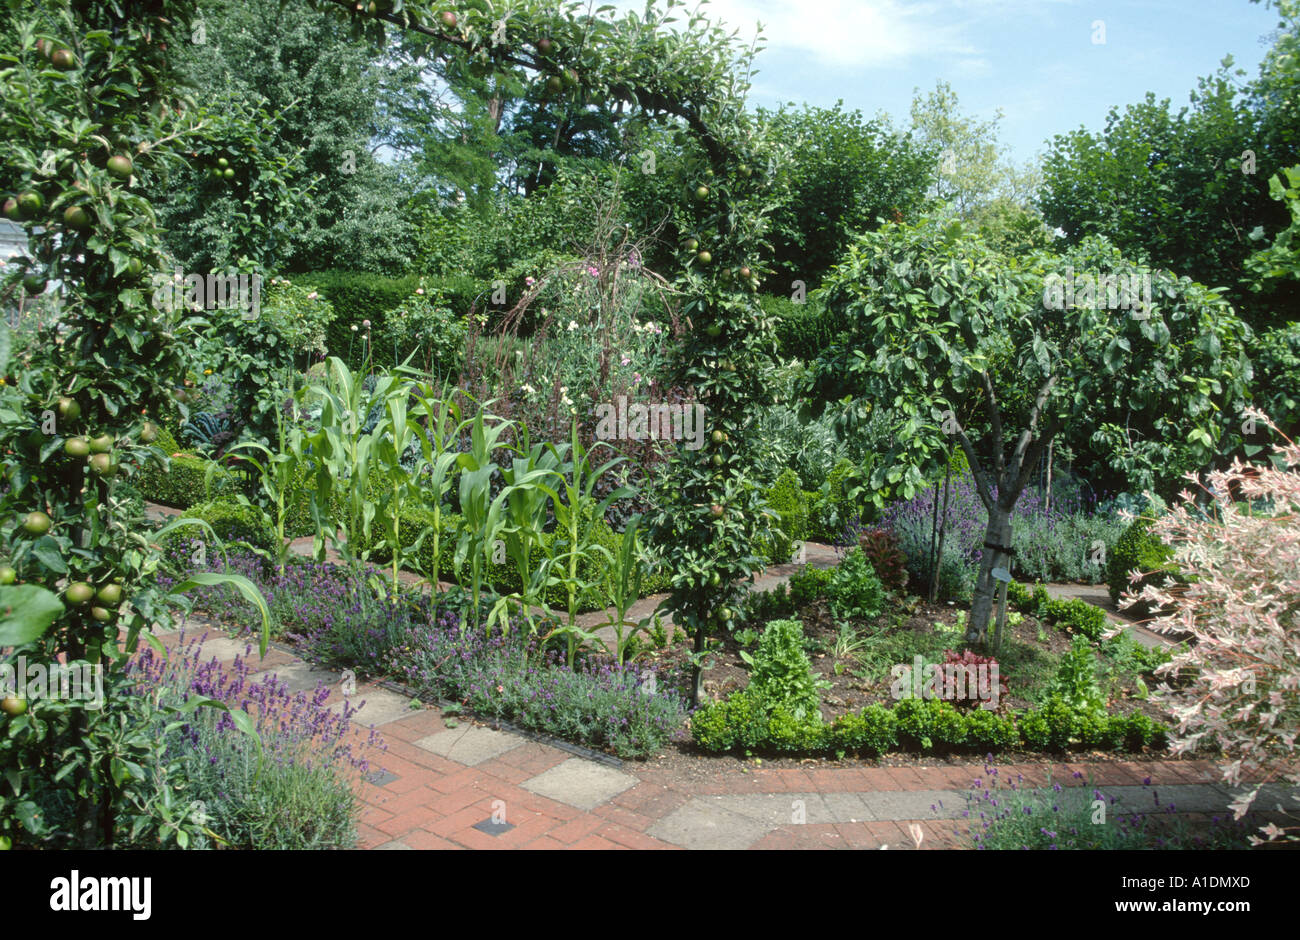 potager garden with sweetcorn and other crops Stock Photo